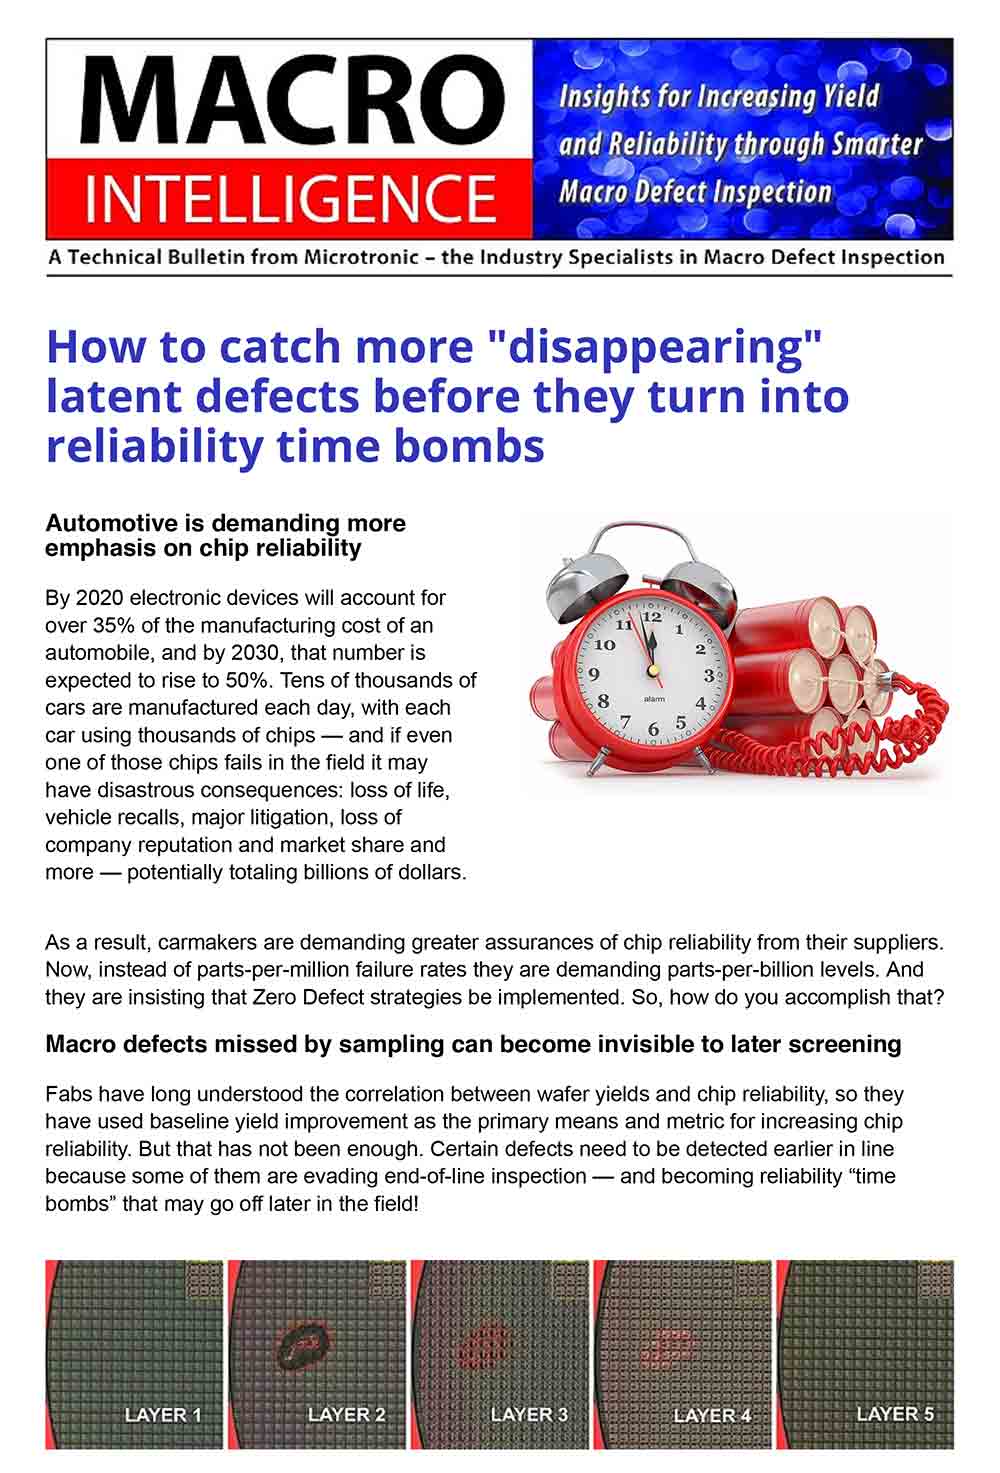 How to catch more “disappearing” latent defects before they turn into reliability time bombs